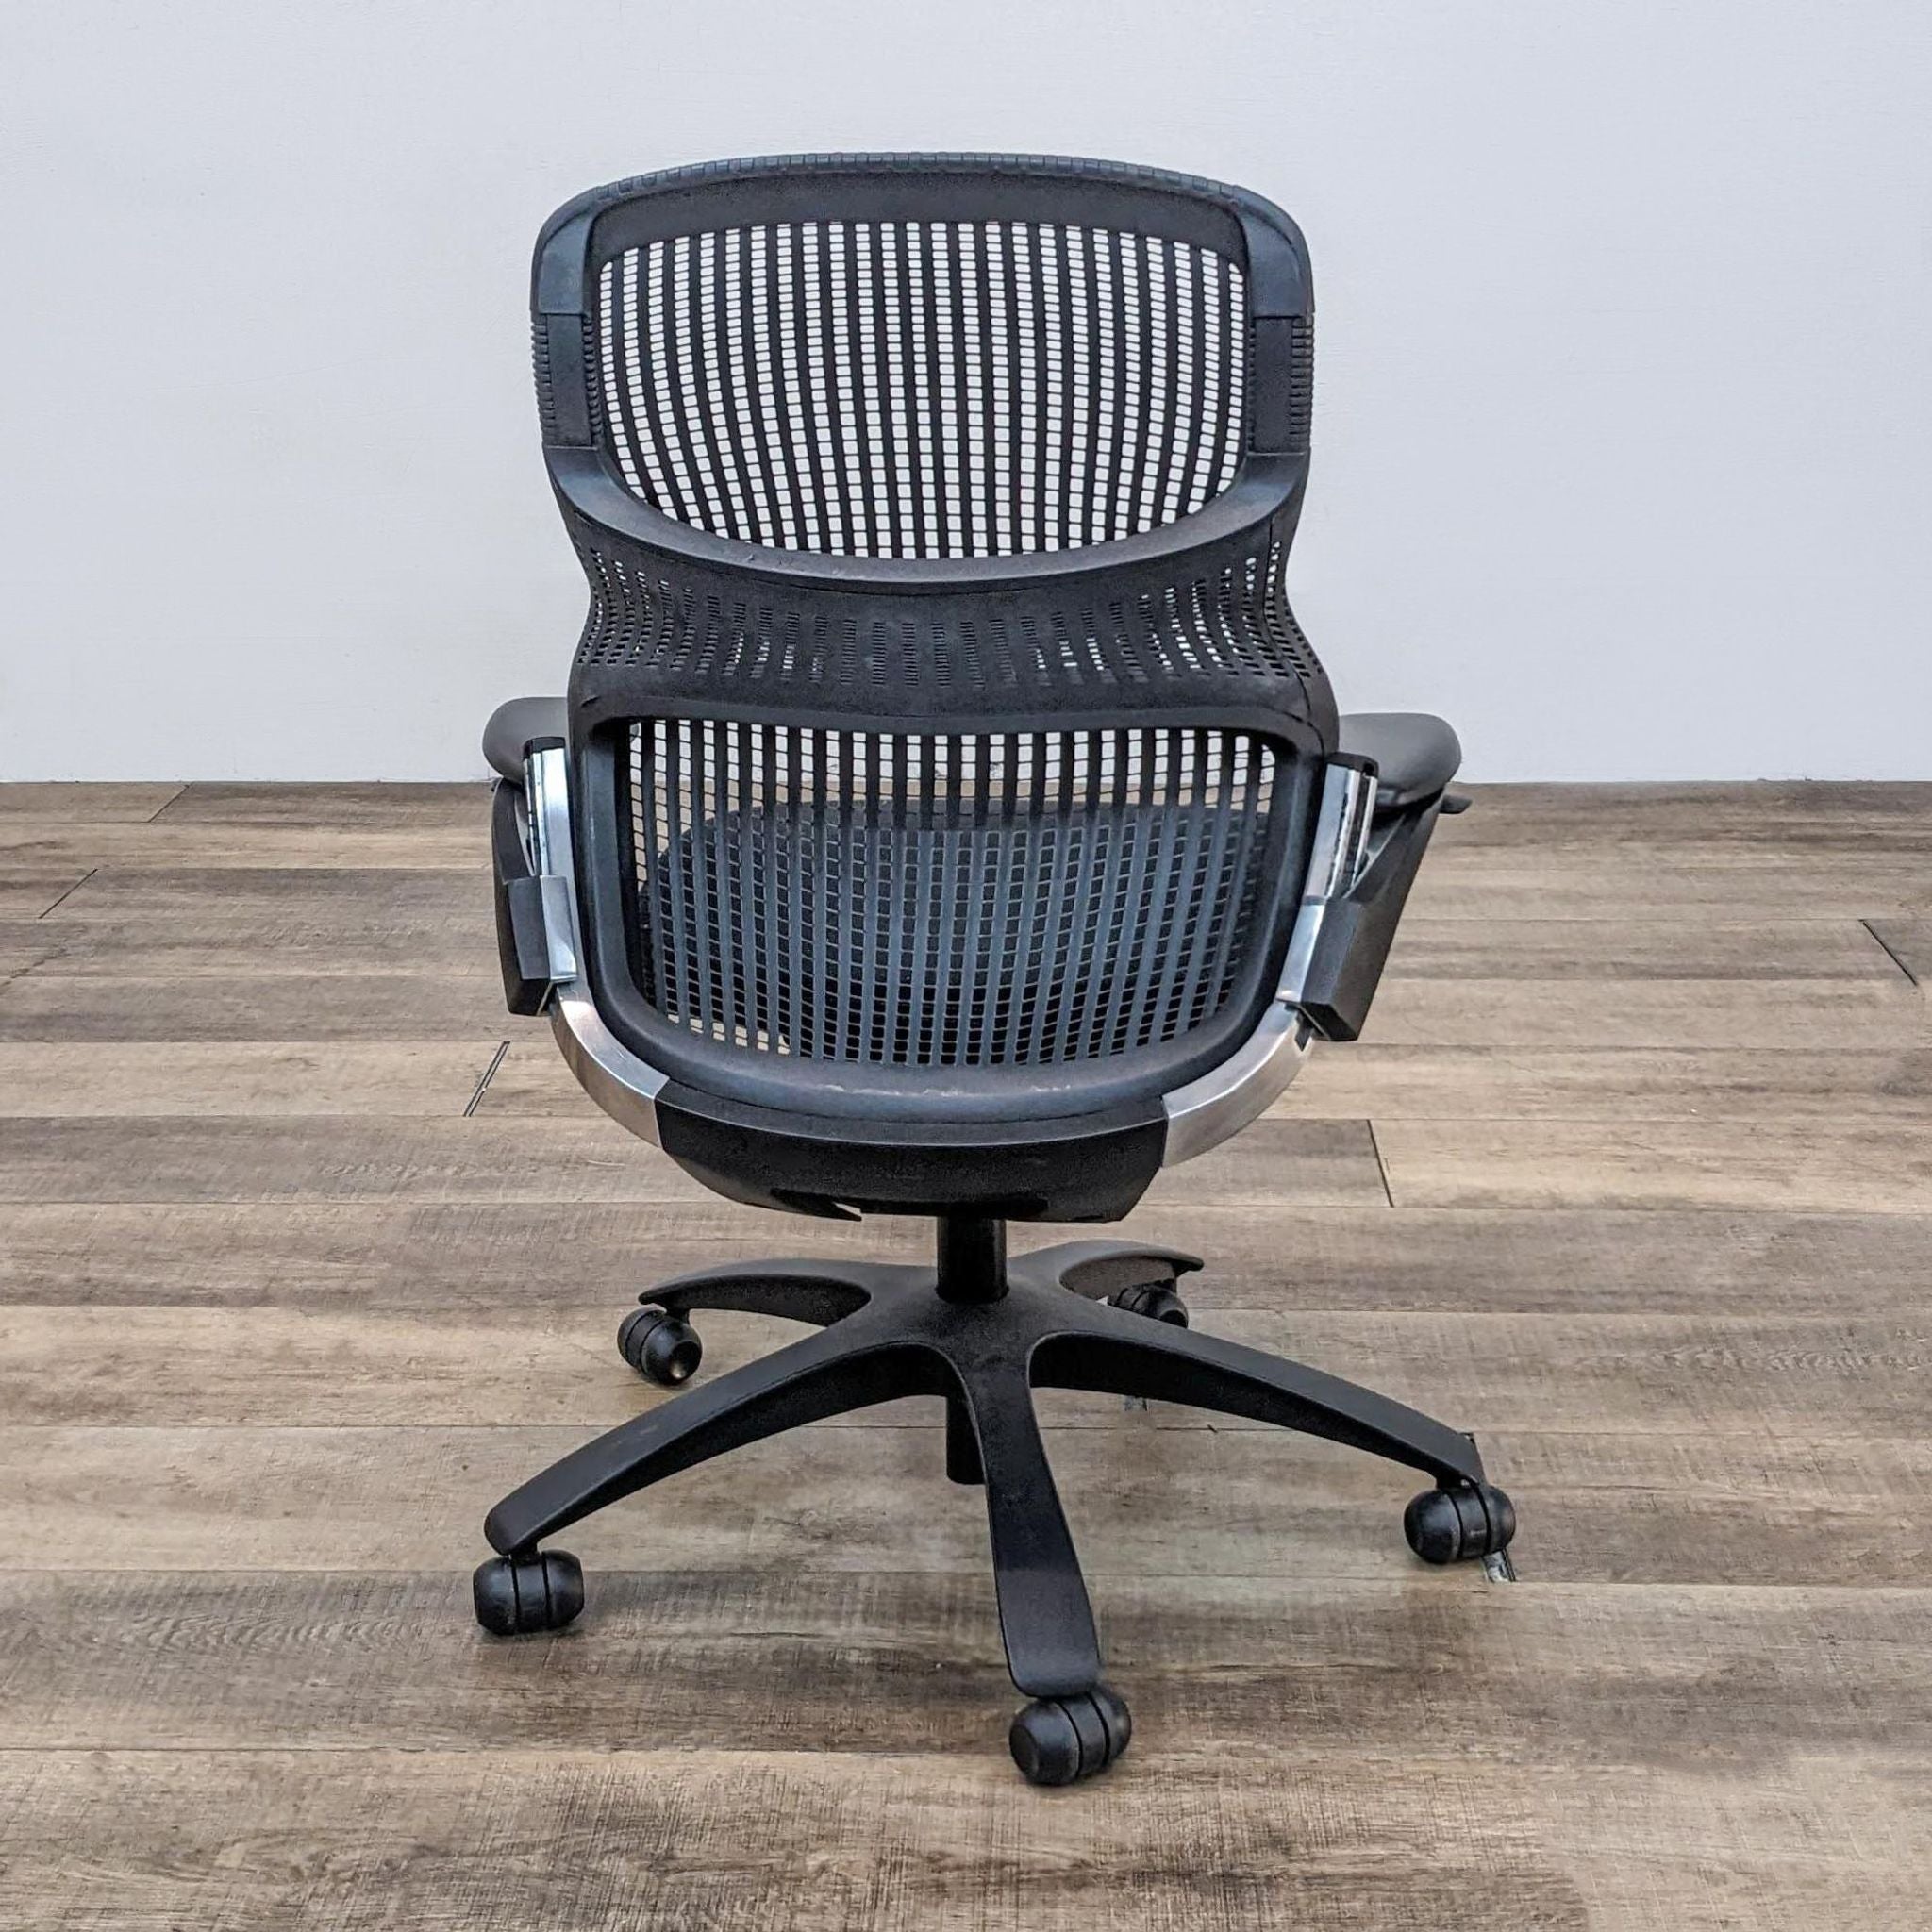 Knoll Generation office chair with figure 8 structure, flex back net, and frameless seat on casters.